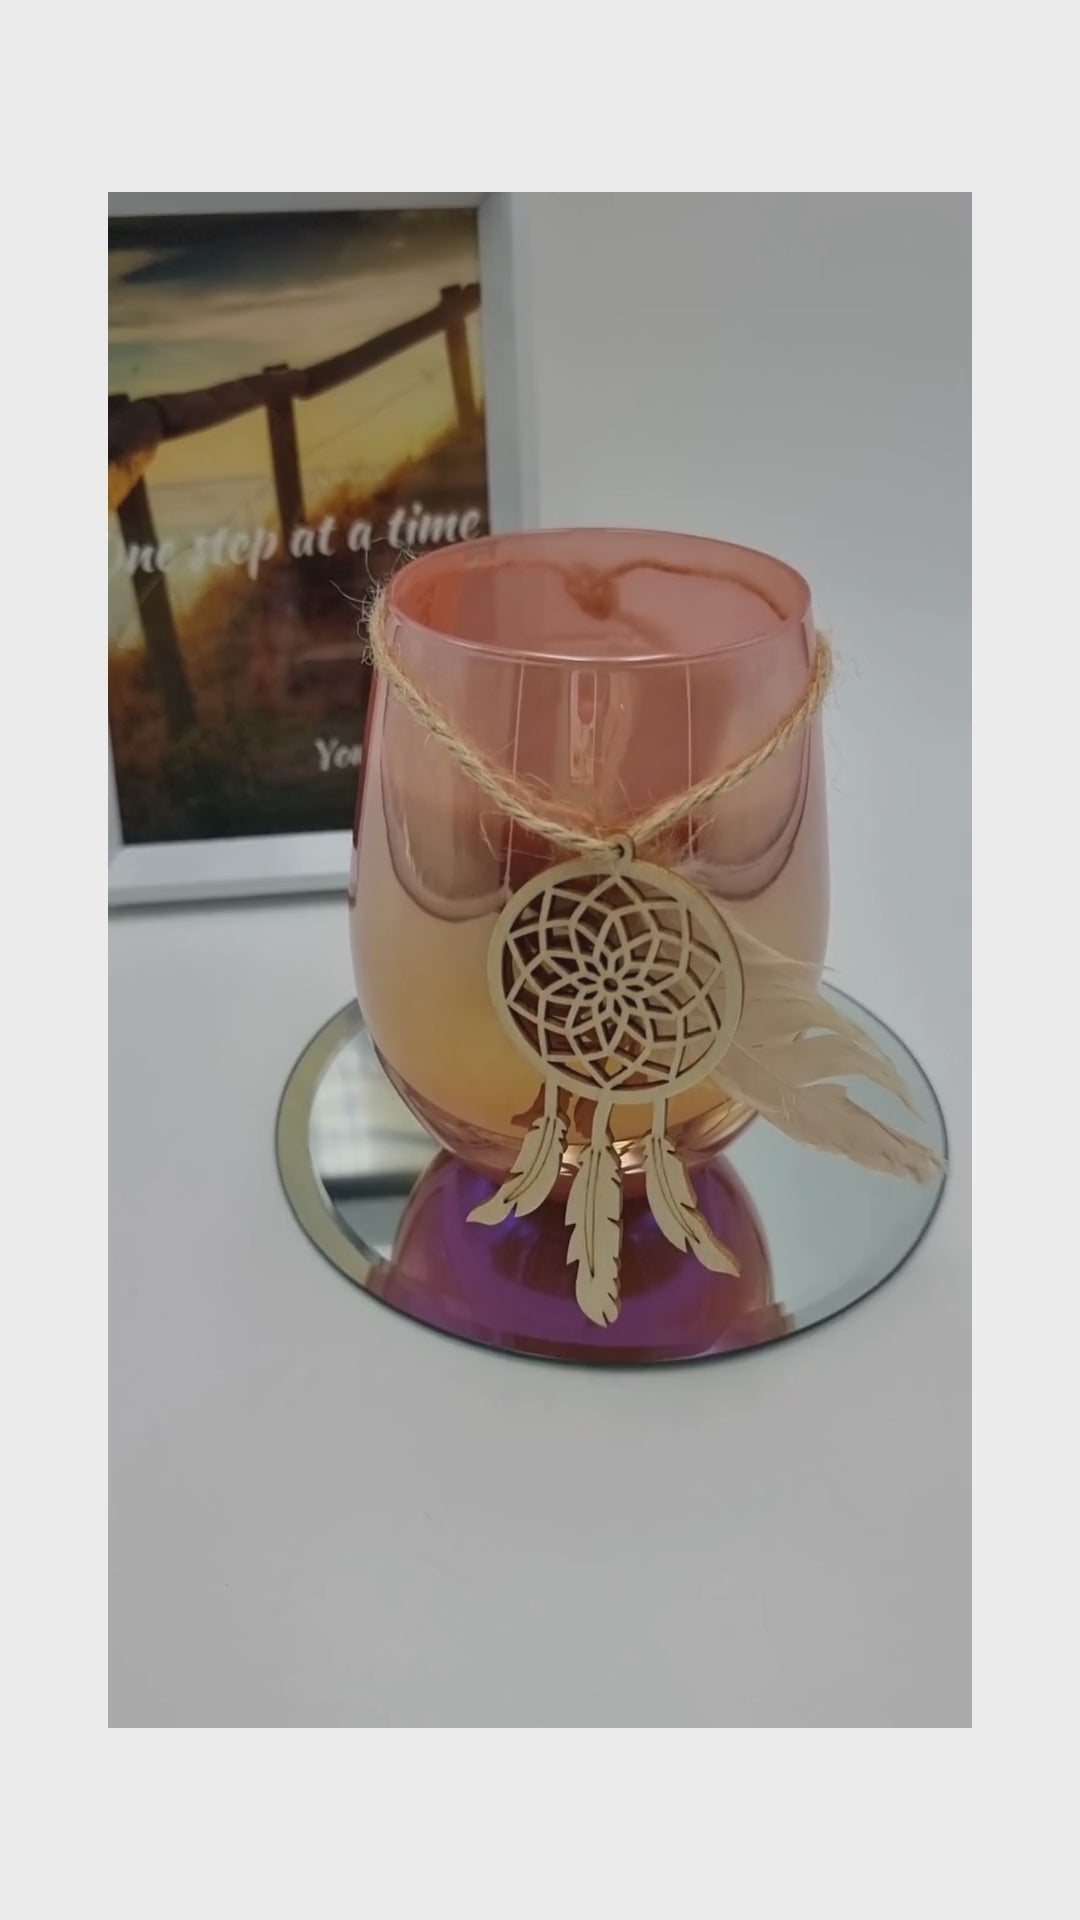 Pastel Cerise Iridescent Candle infused with your choice of fragrance